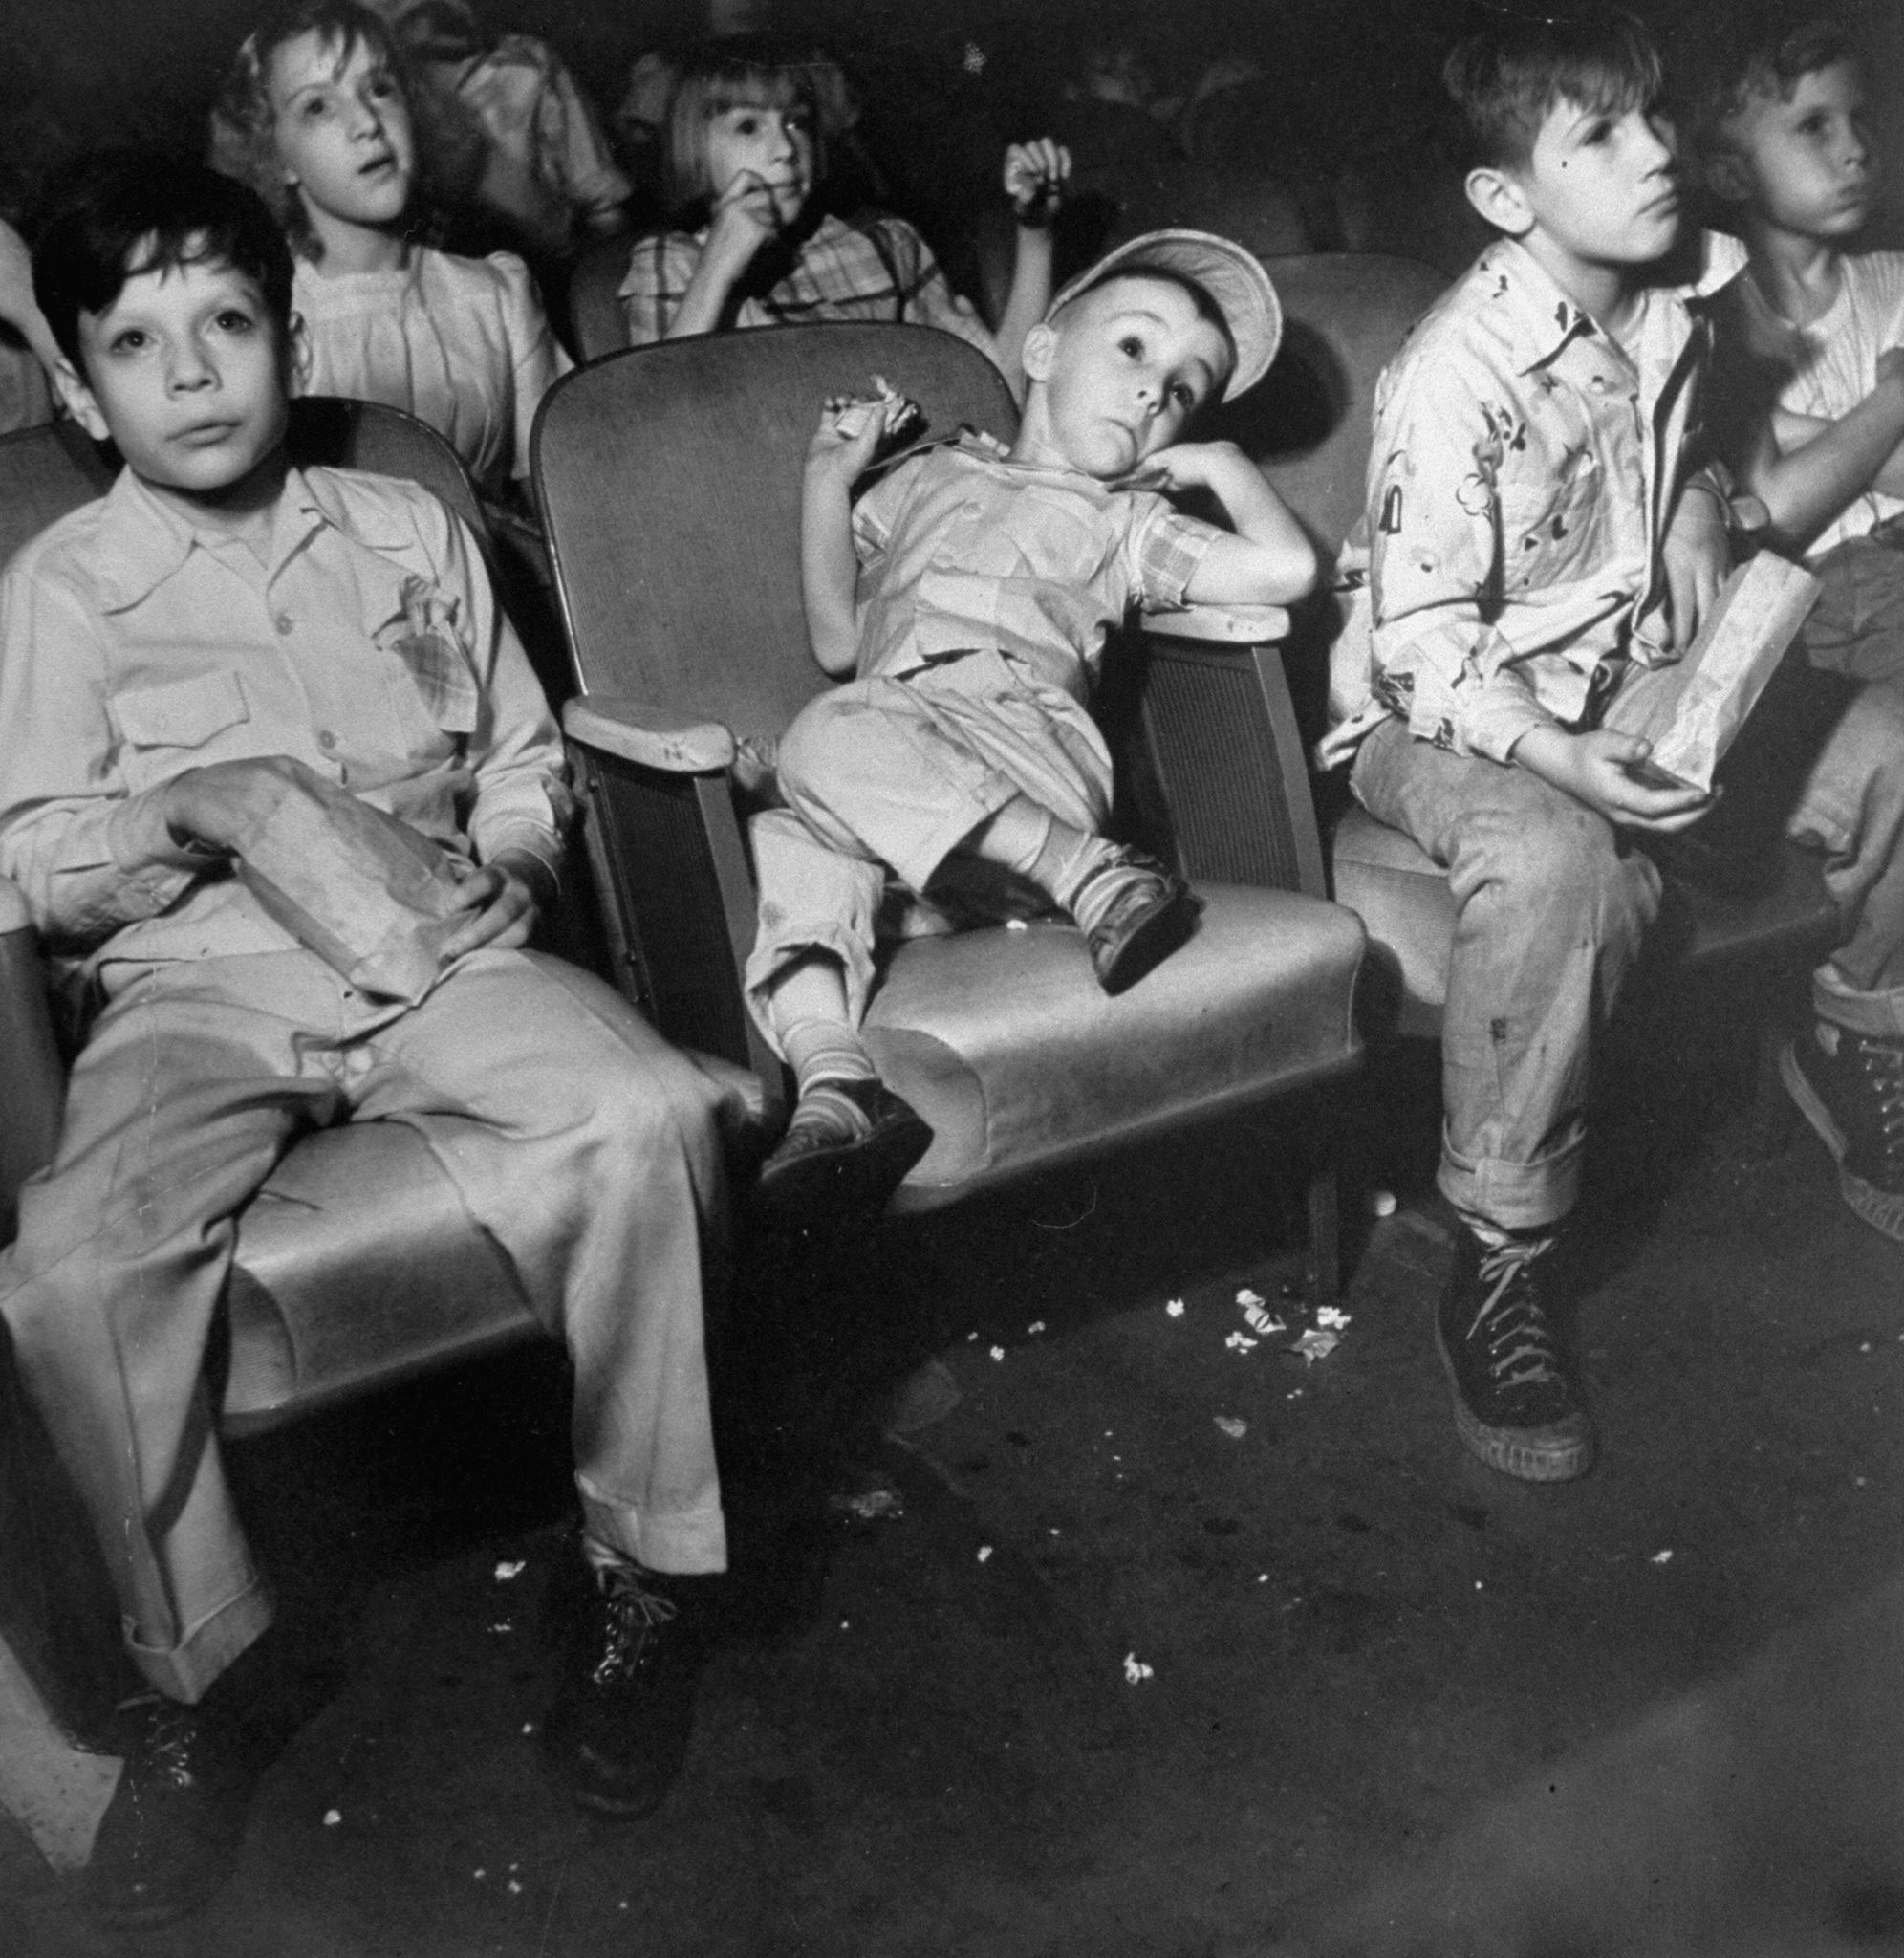 Kids shove popcorn into their mouths while keeping their eyes on the screen at the local movie house, Fresno, Calif., 1949.